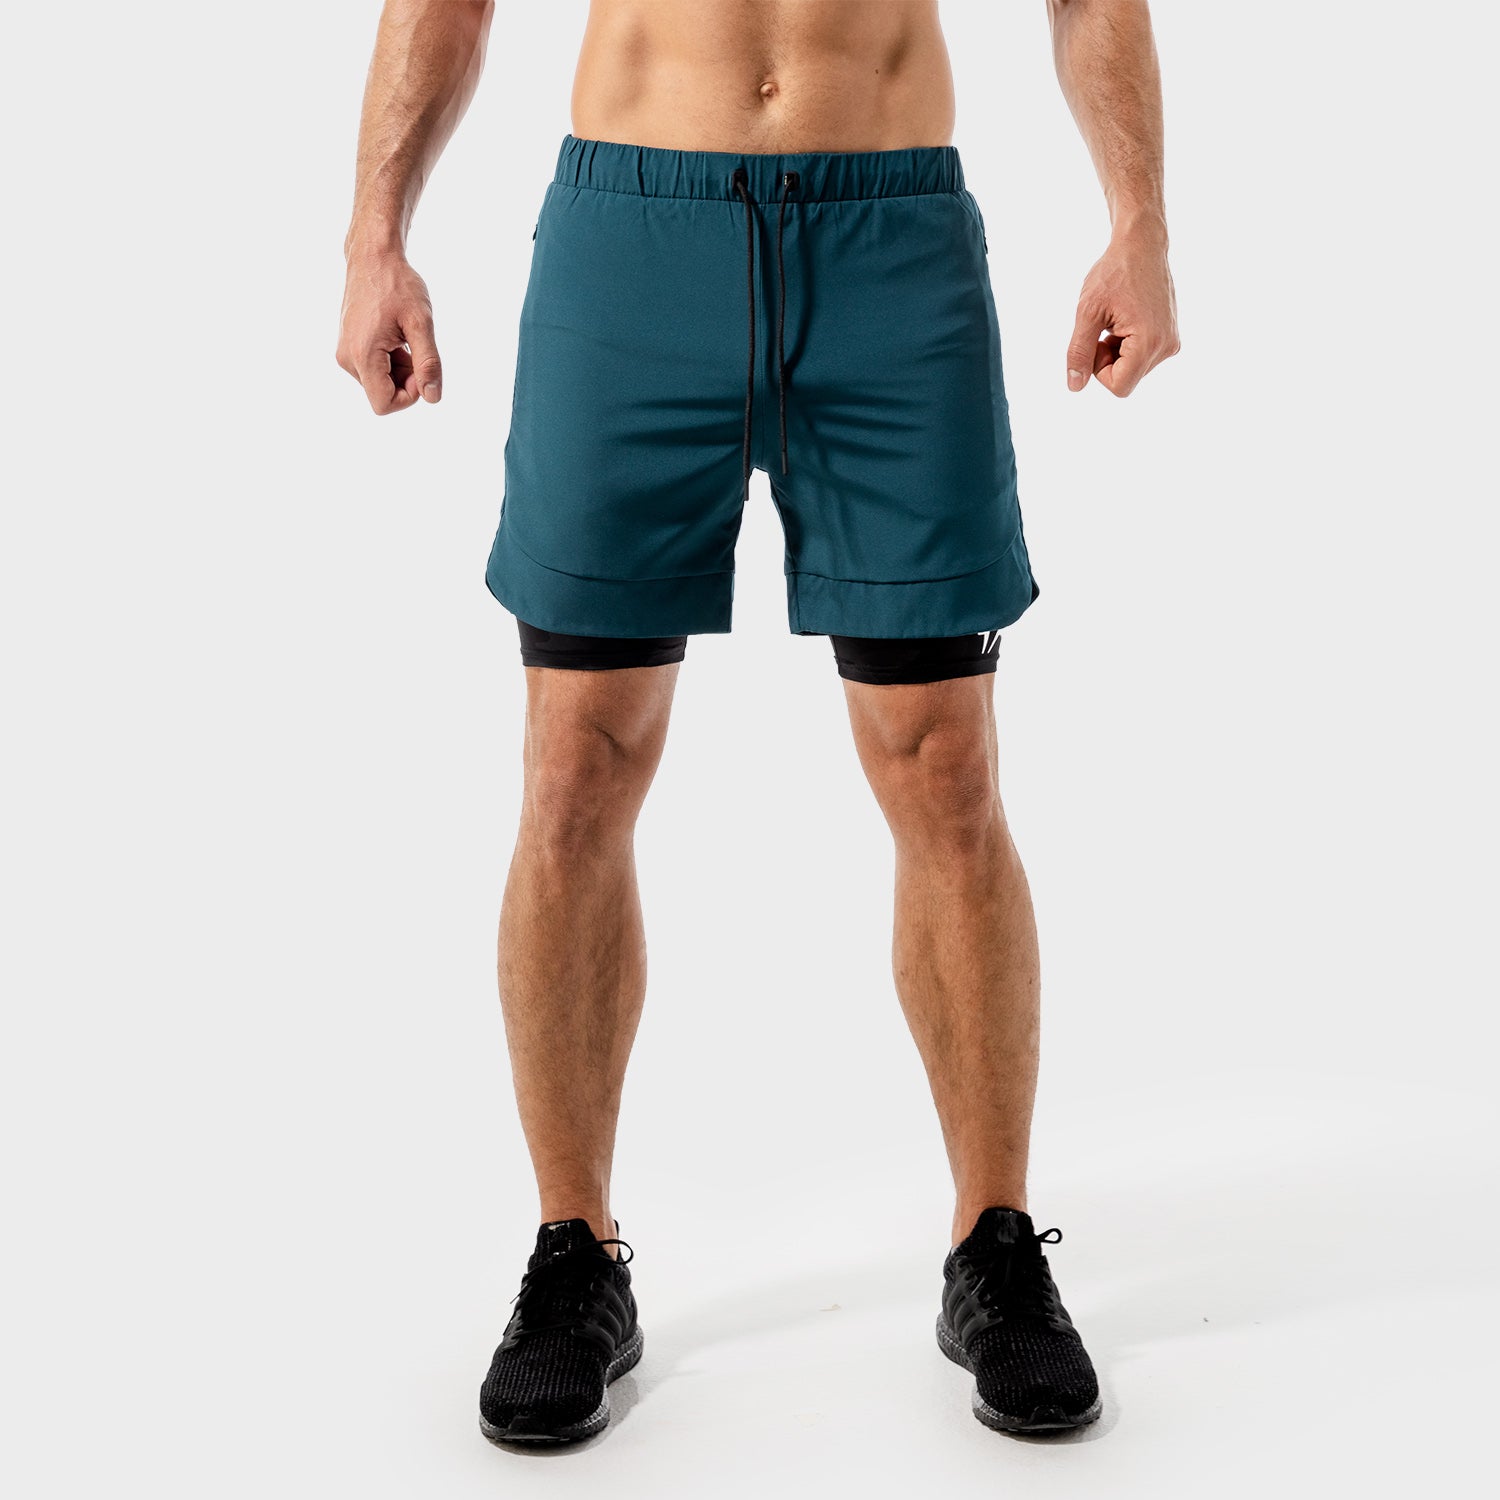 AE, Limitless 2-in-1 Shorts - Teal, Gym Shorts Men